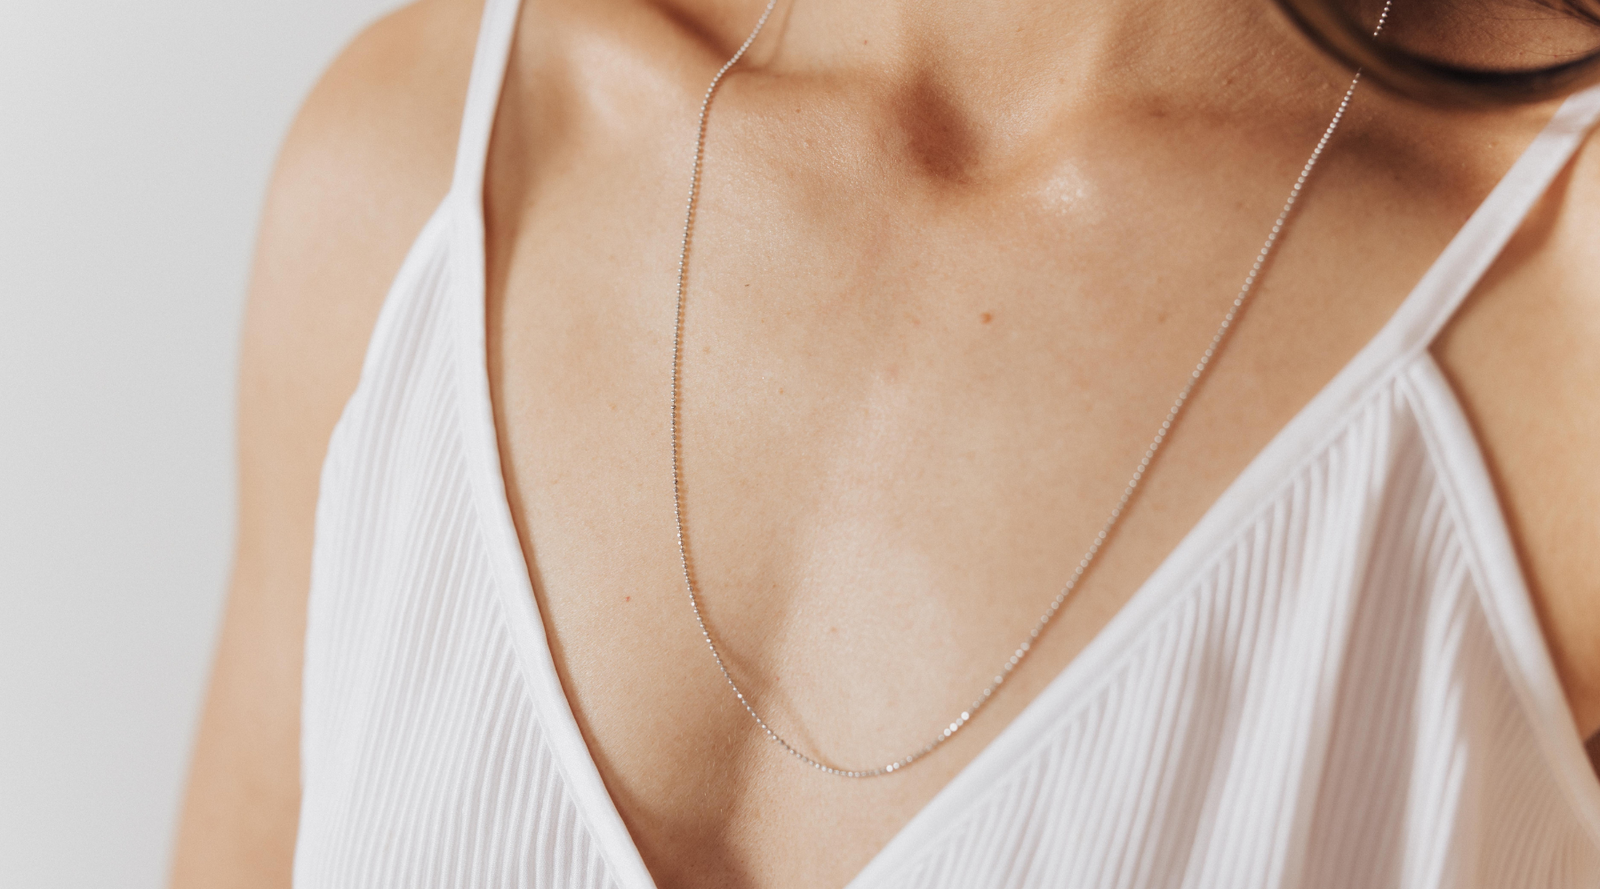 How to Choose the Right Necklace Length for You